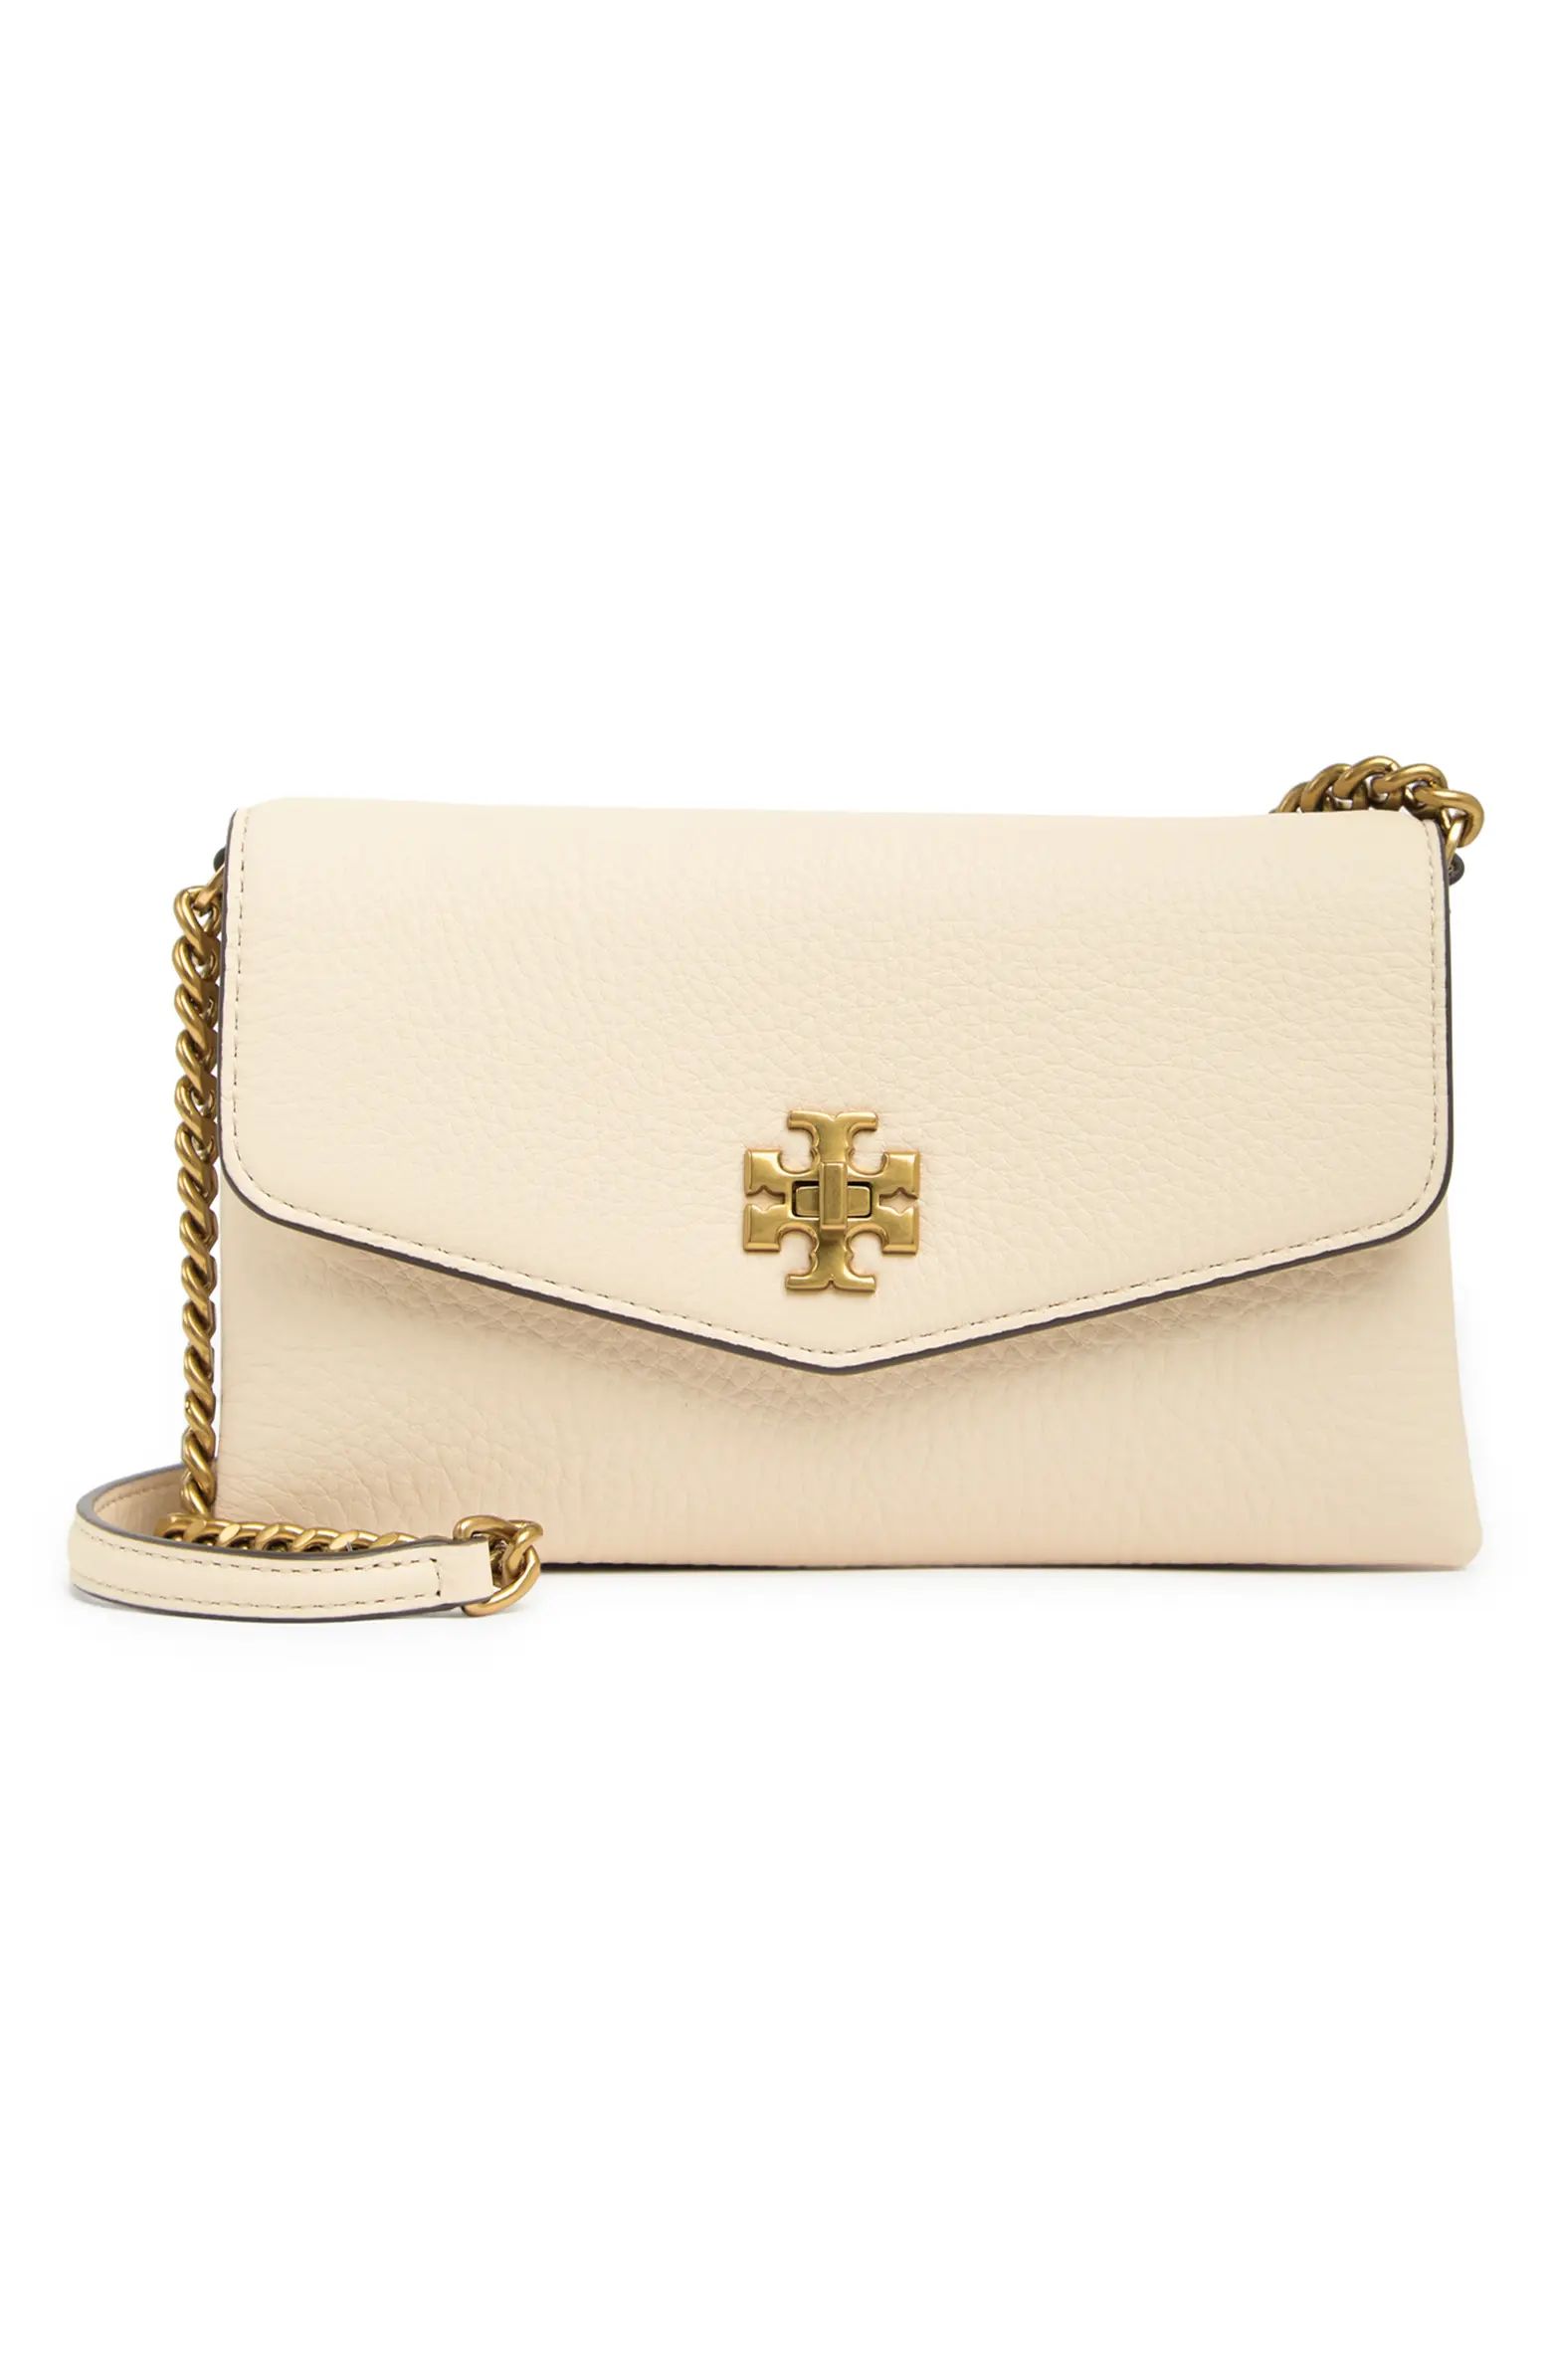 Tory Burch Kira Pebble Leather Wallet on a Chain | Nordstrom | Nordstrom